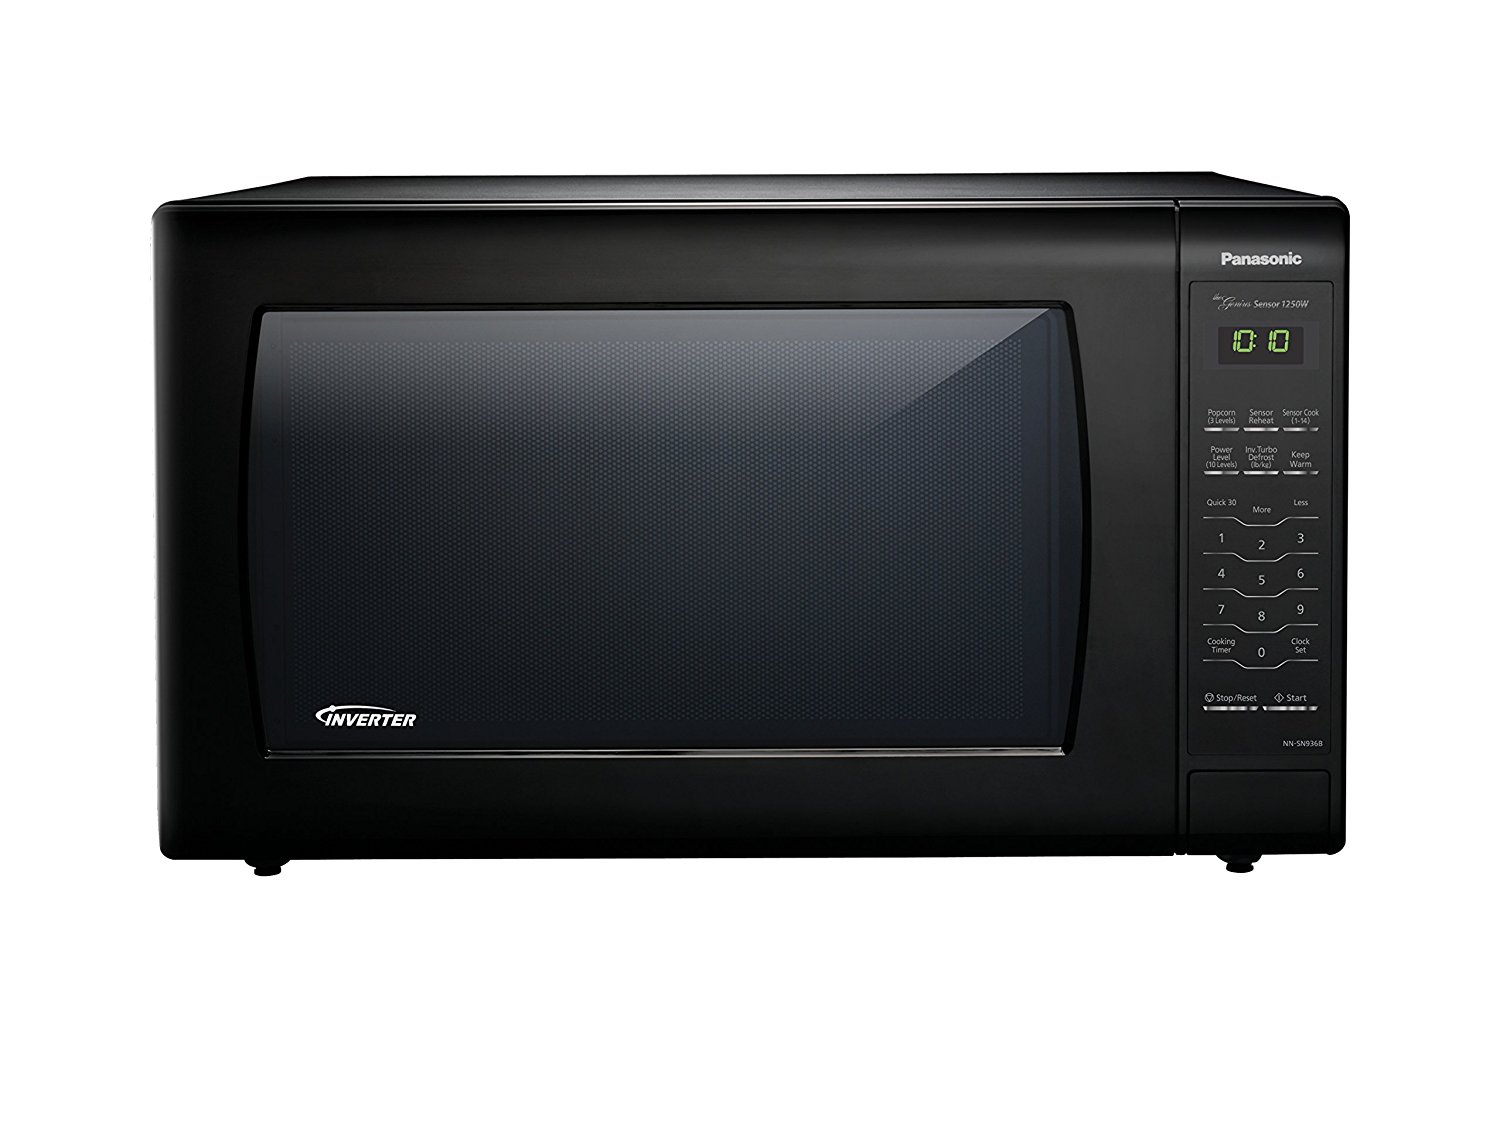 Advanced Technology for Perfect Results: The Panasonic NN-SN936B Microwave Oven